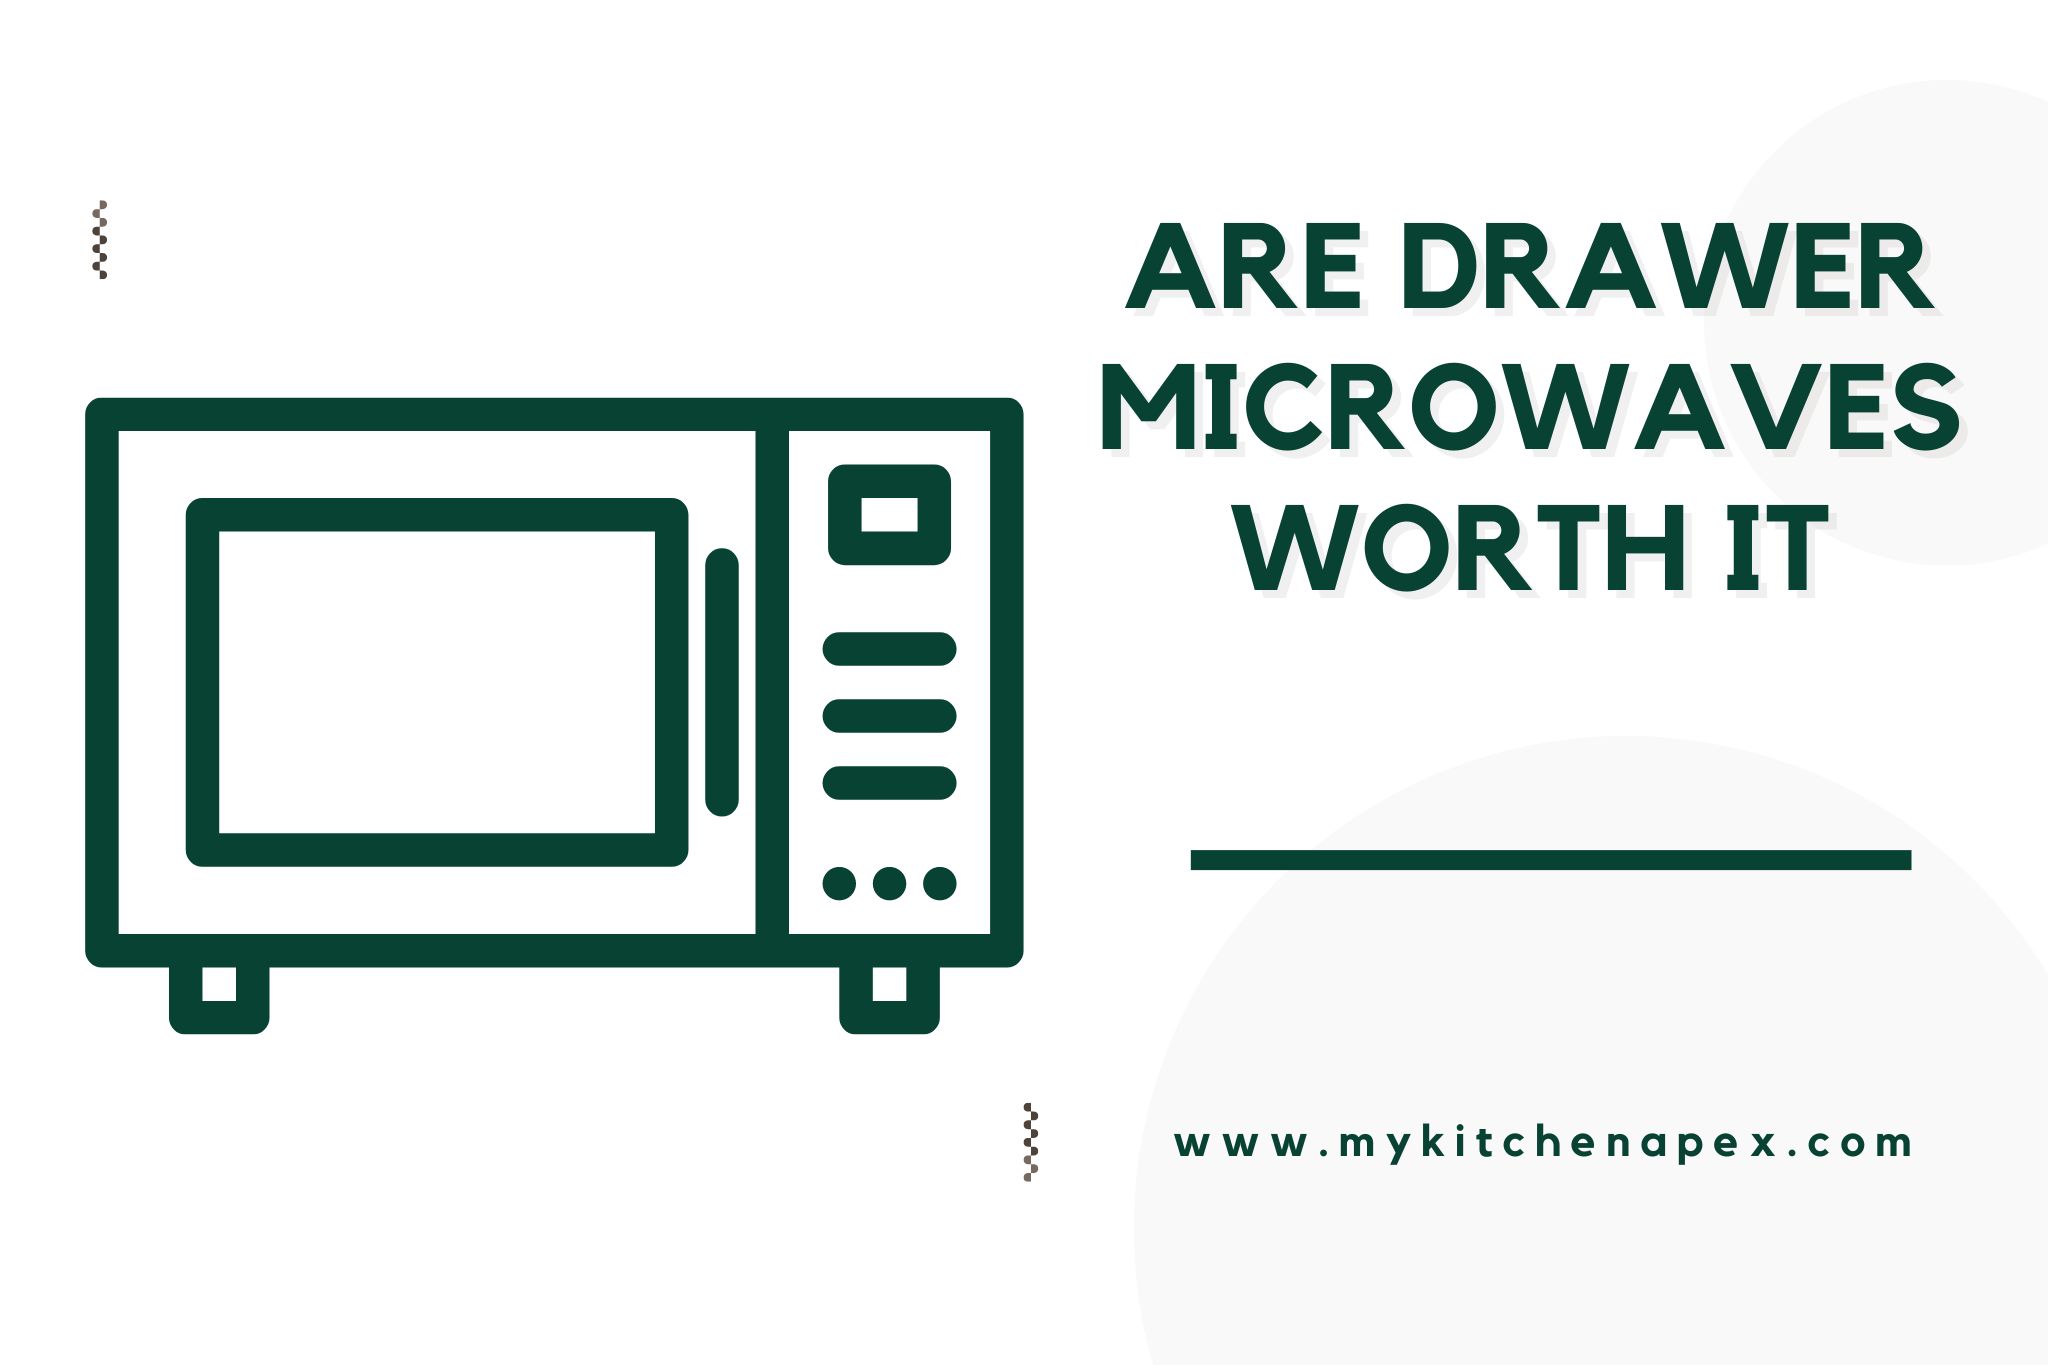 are drawer microwaves worth it